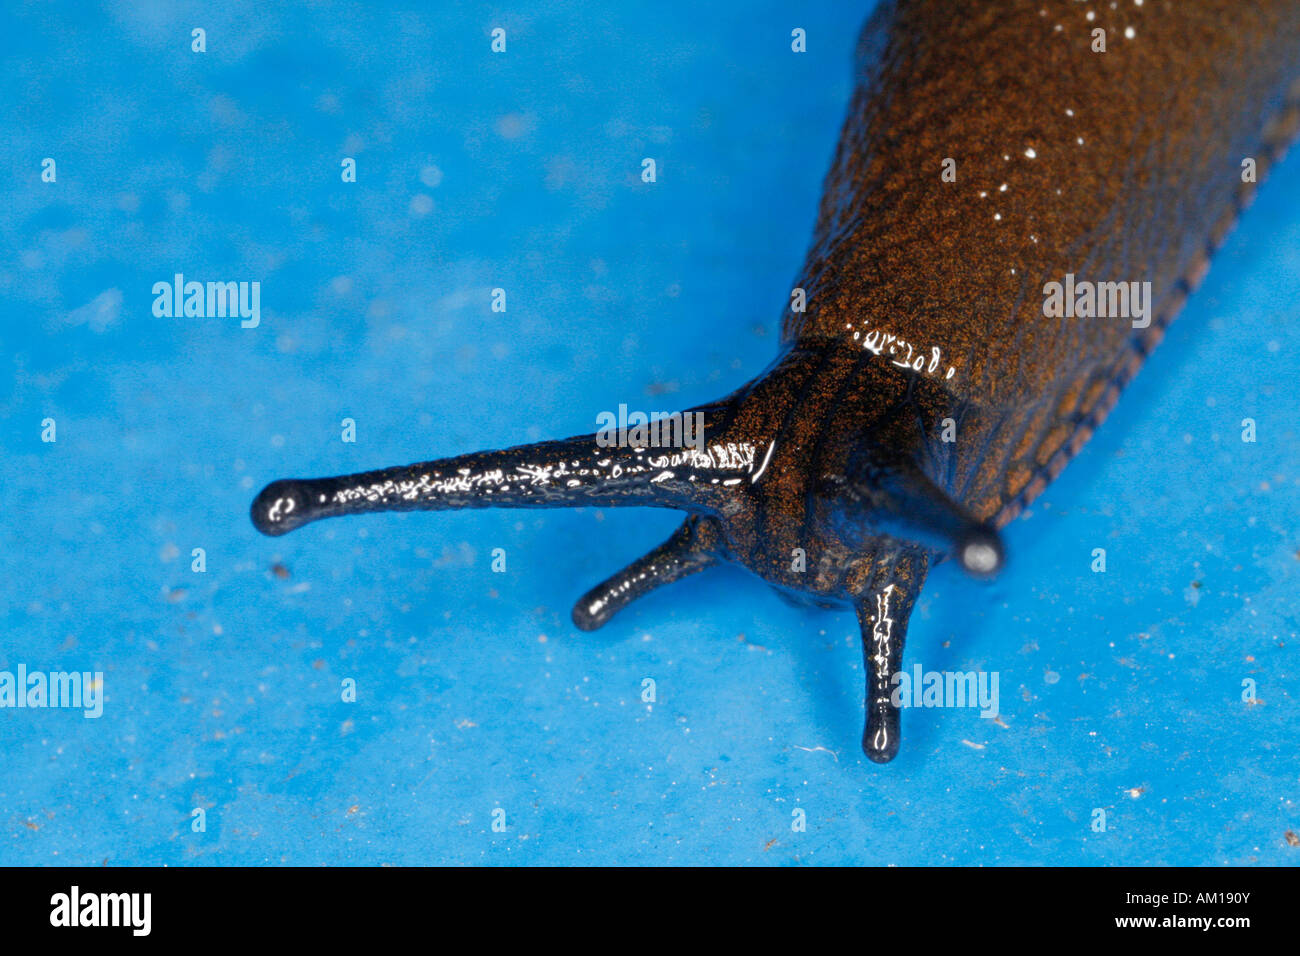 Close-up of a snail Stock Photo